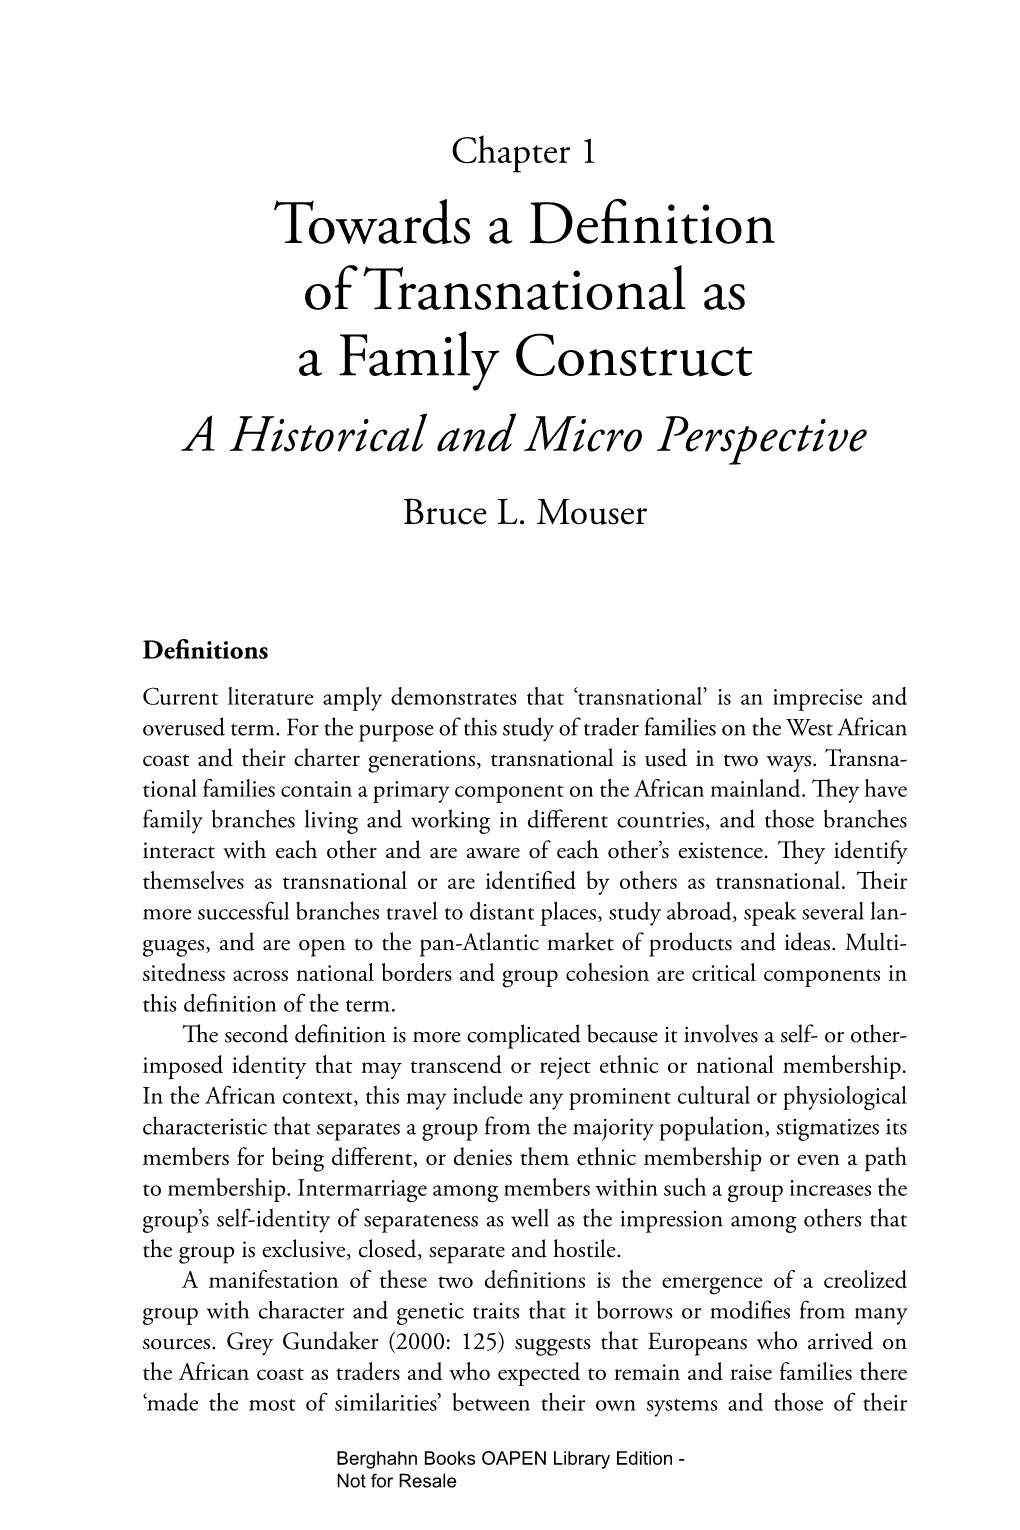 Chapter 1. Towards a Definition of Transnational As a Family Construct